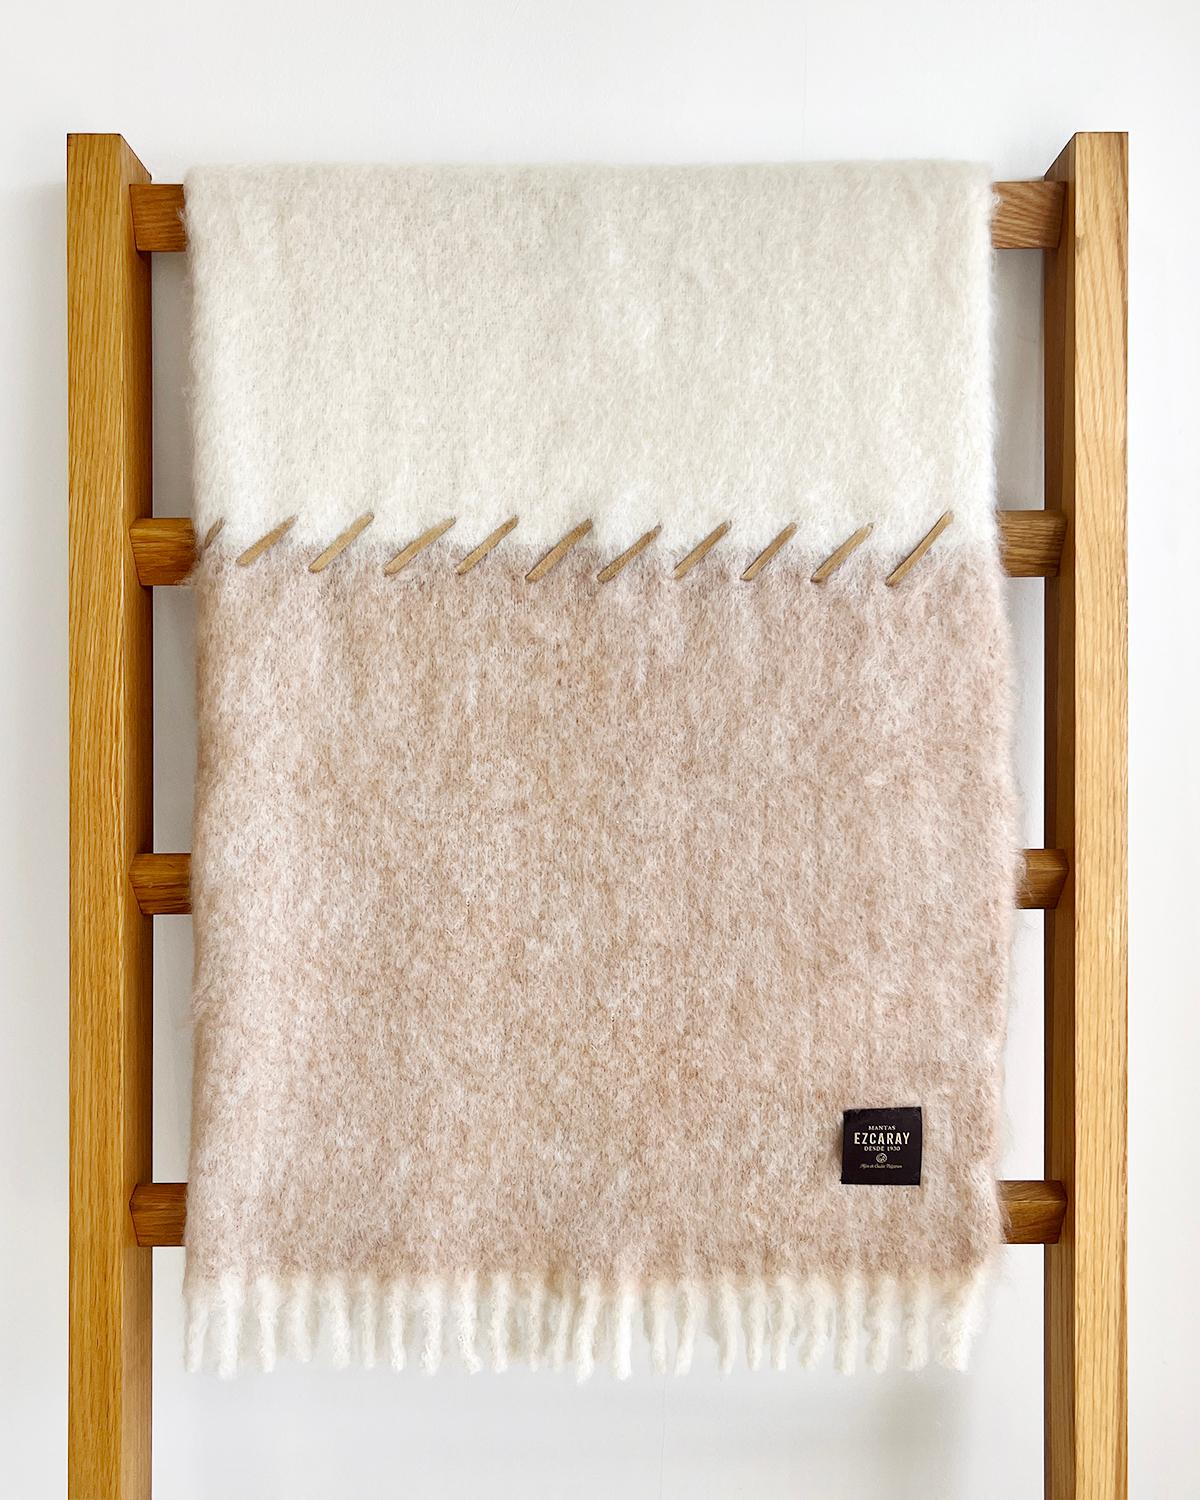 This Oatmeal and Cream Mohair Blanket is crafted with mohair and features two-toned beige and light brown colors with a suede whipstitch accent. It's soft and cozy, perfect for the winter season, and its classic design makes it an excellent addition